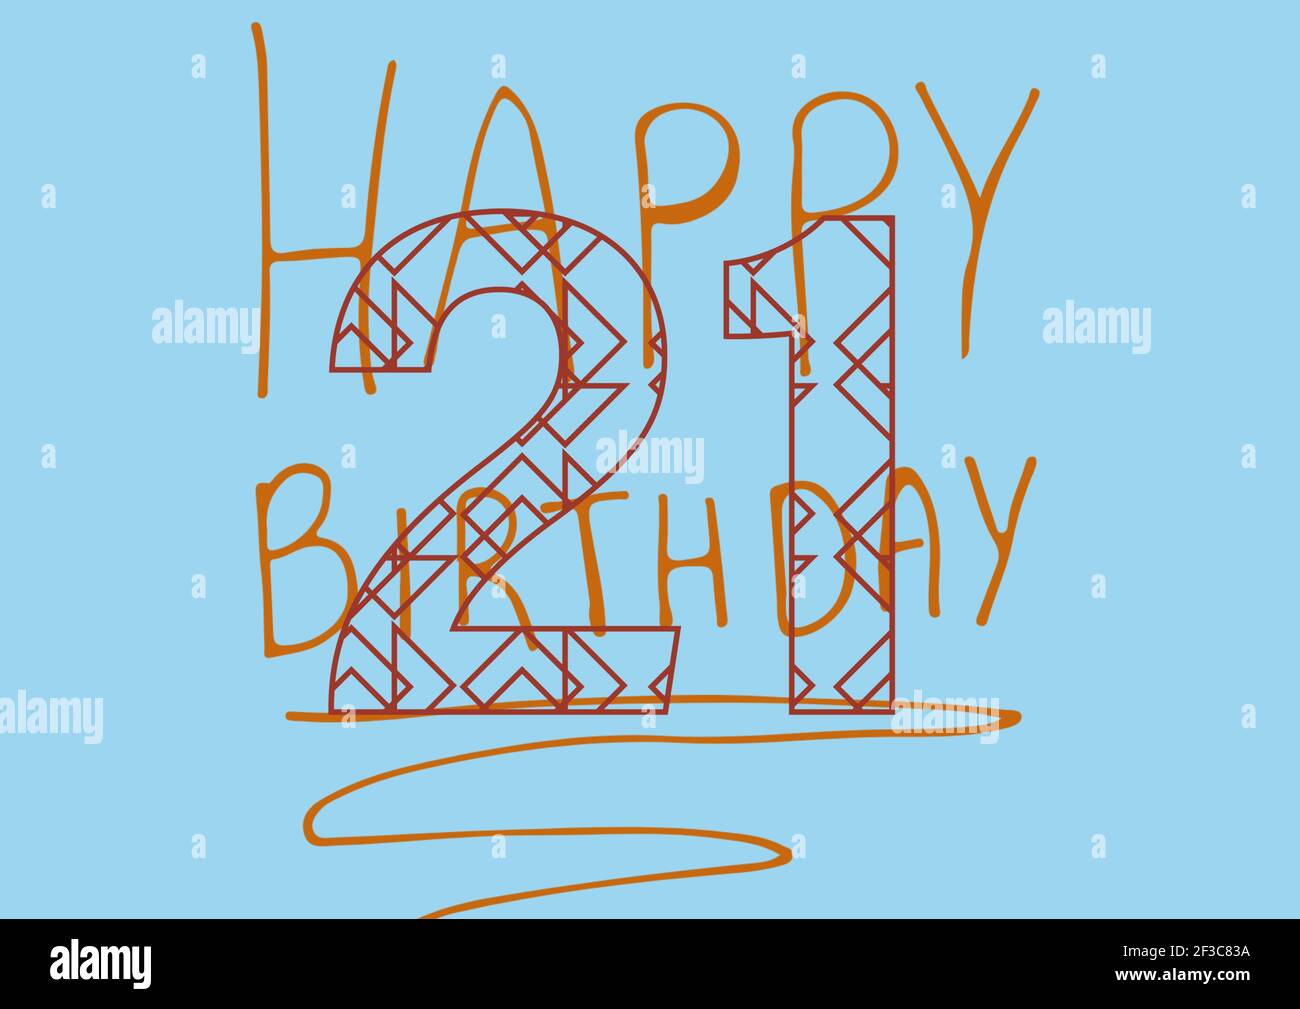 Digitally generated image of happy 21st birthday text against blue background Stock Photo